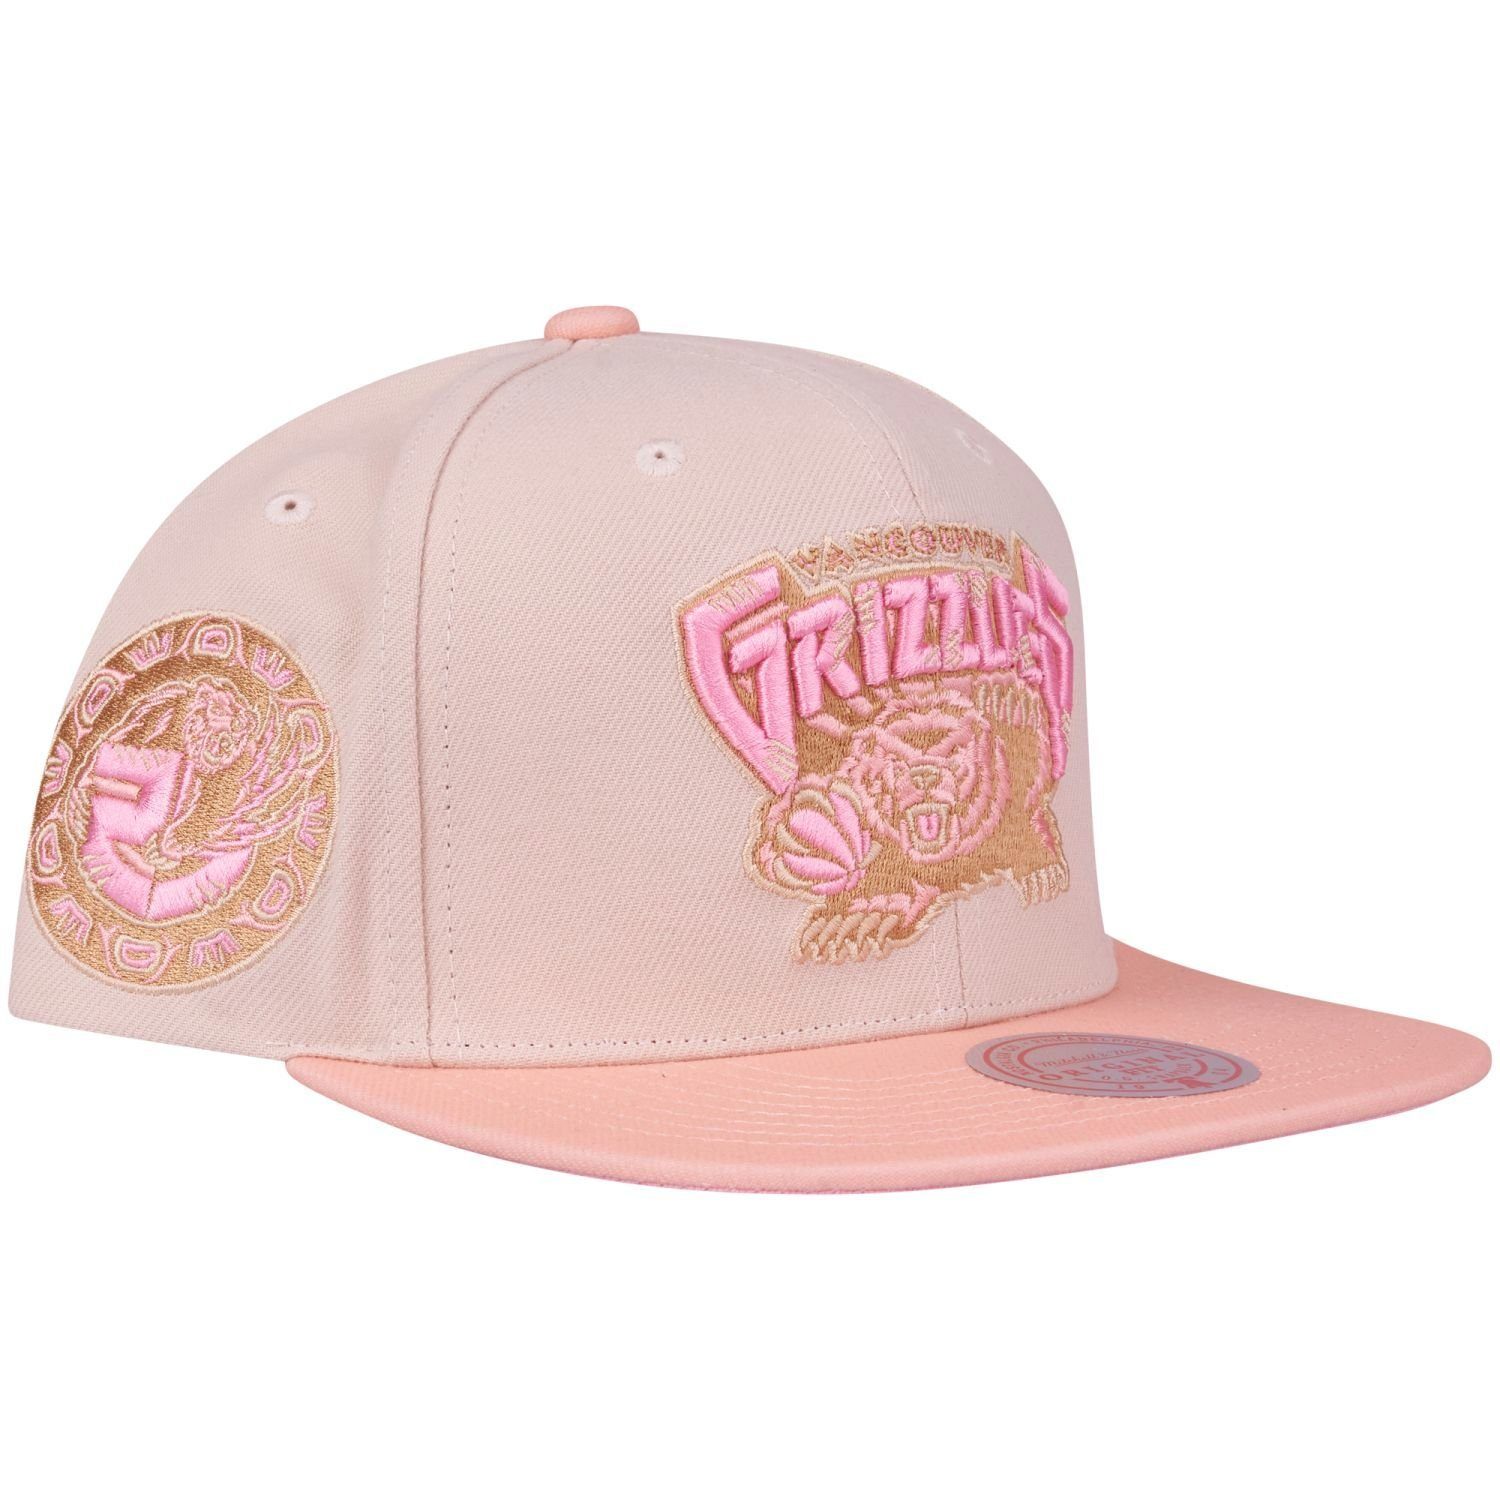 Cap Snapback Ness Mitchell Grizzlies LOVERS Vancouver & LANE